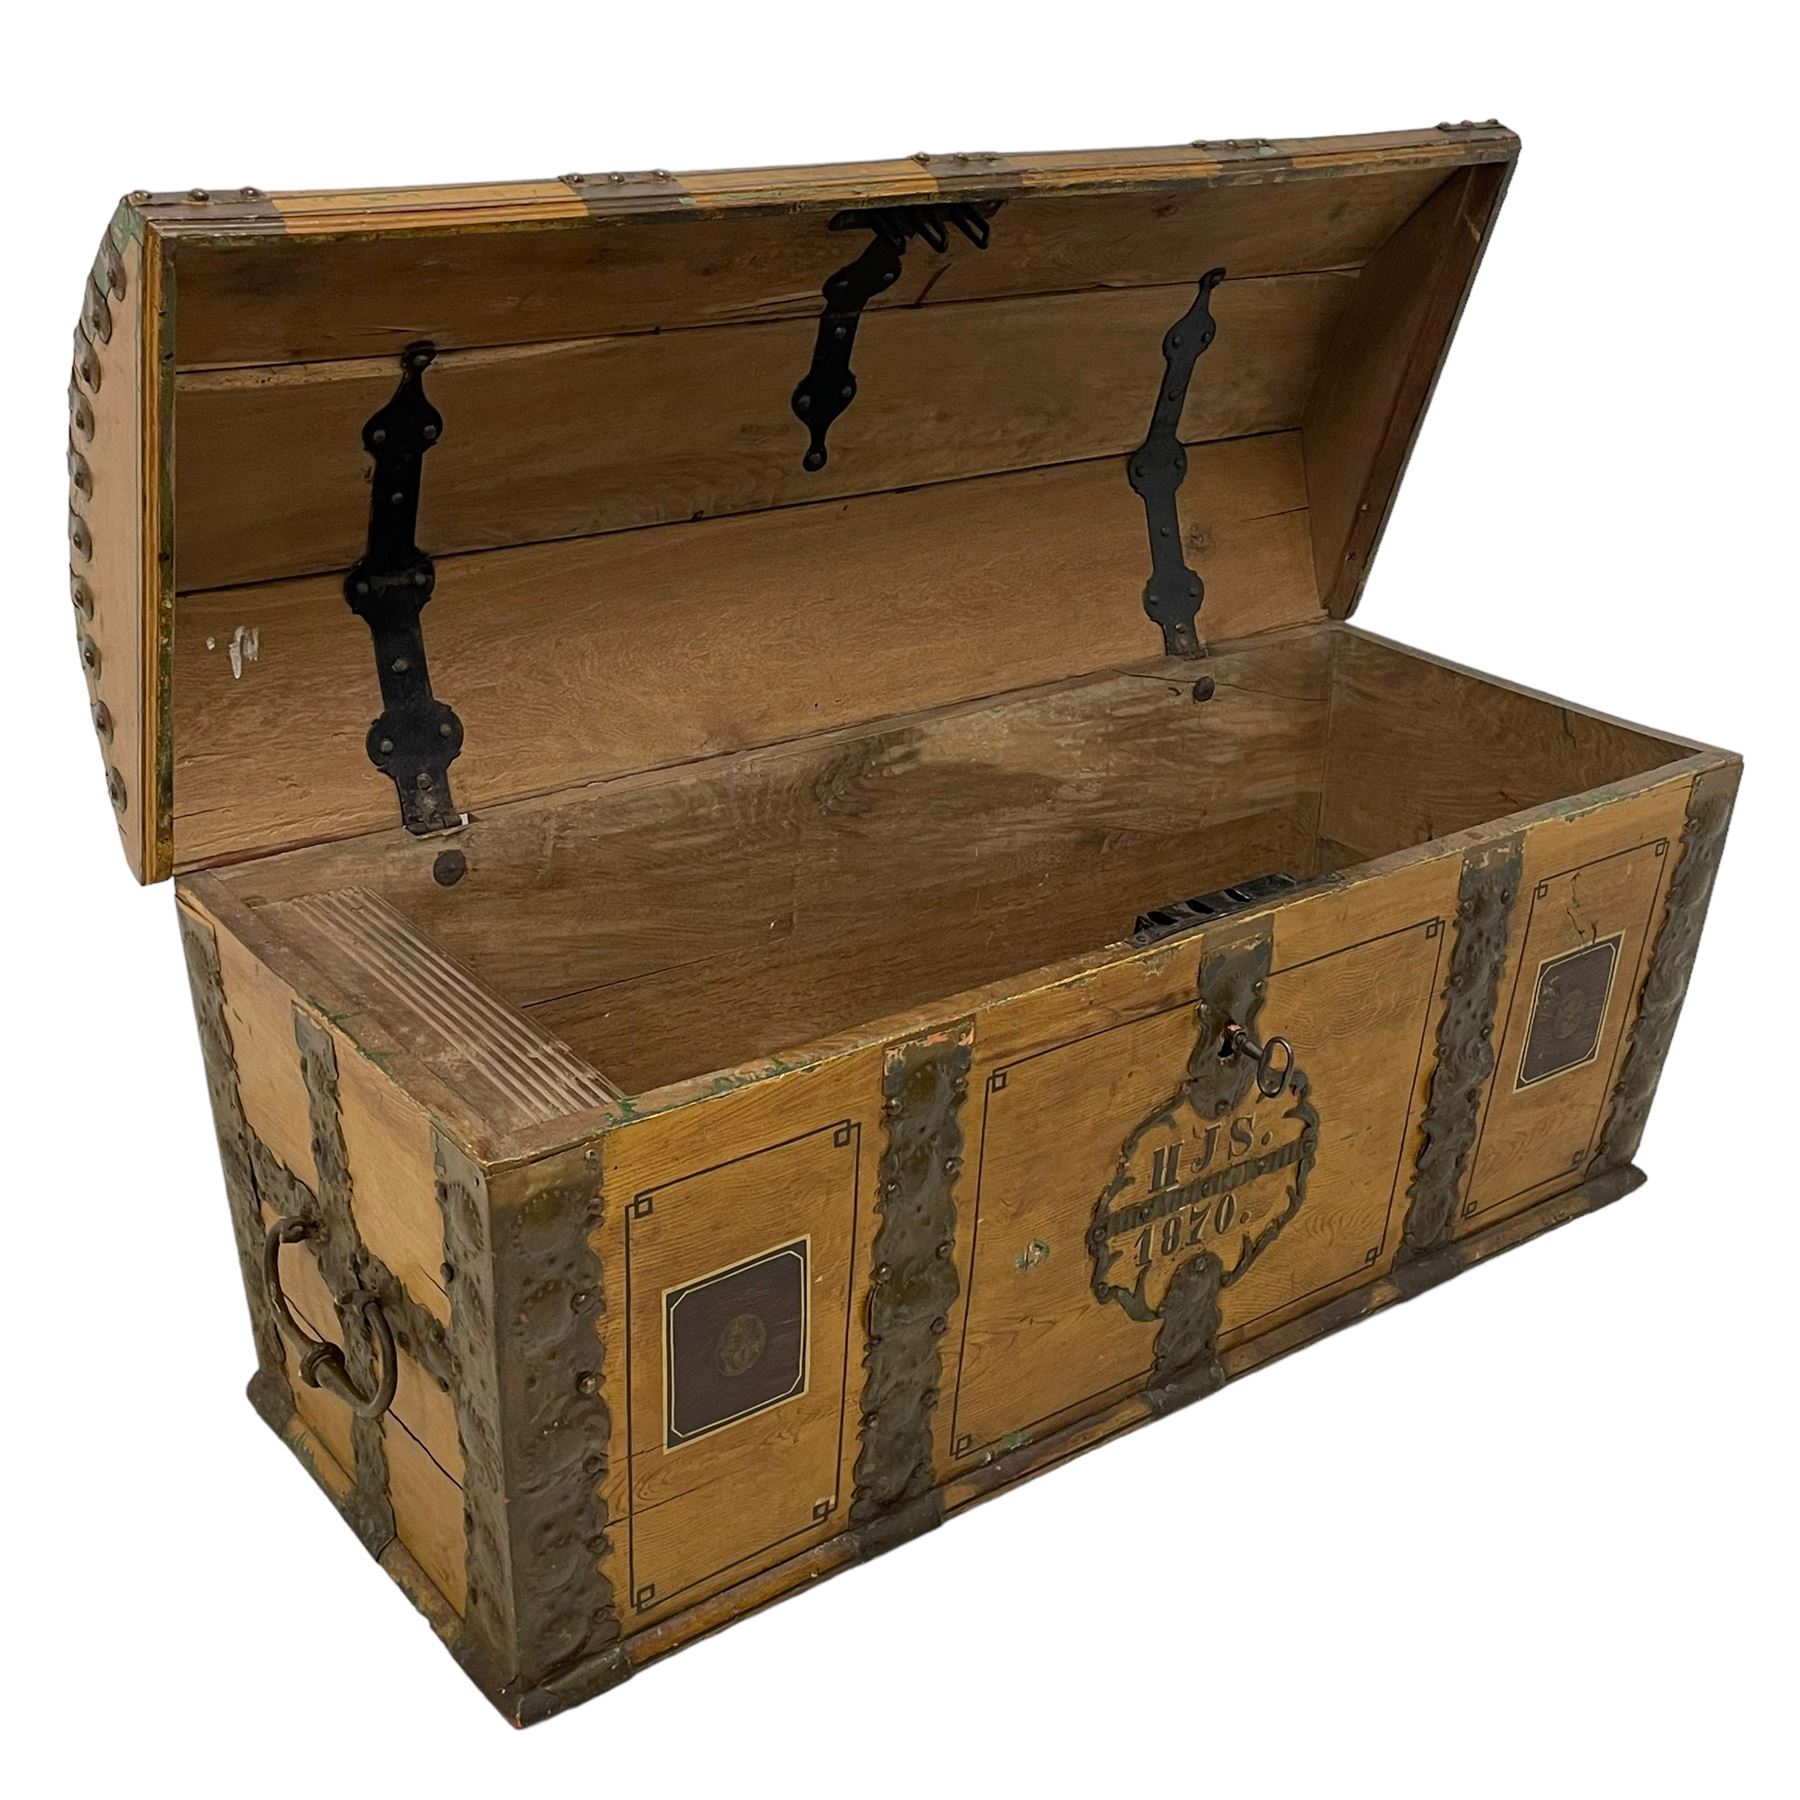 19th century Northern European painted oak sea chest - Image 20 of 29